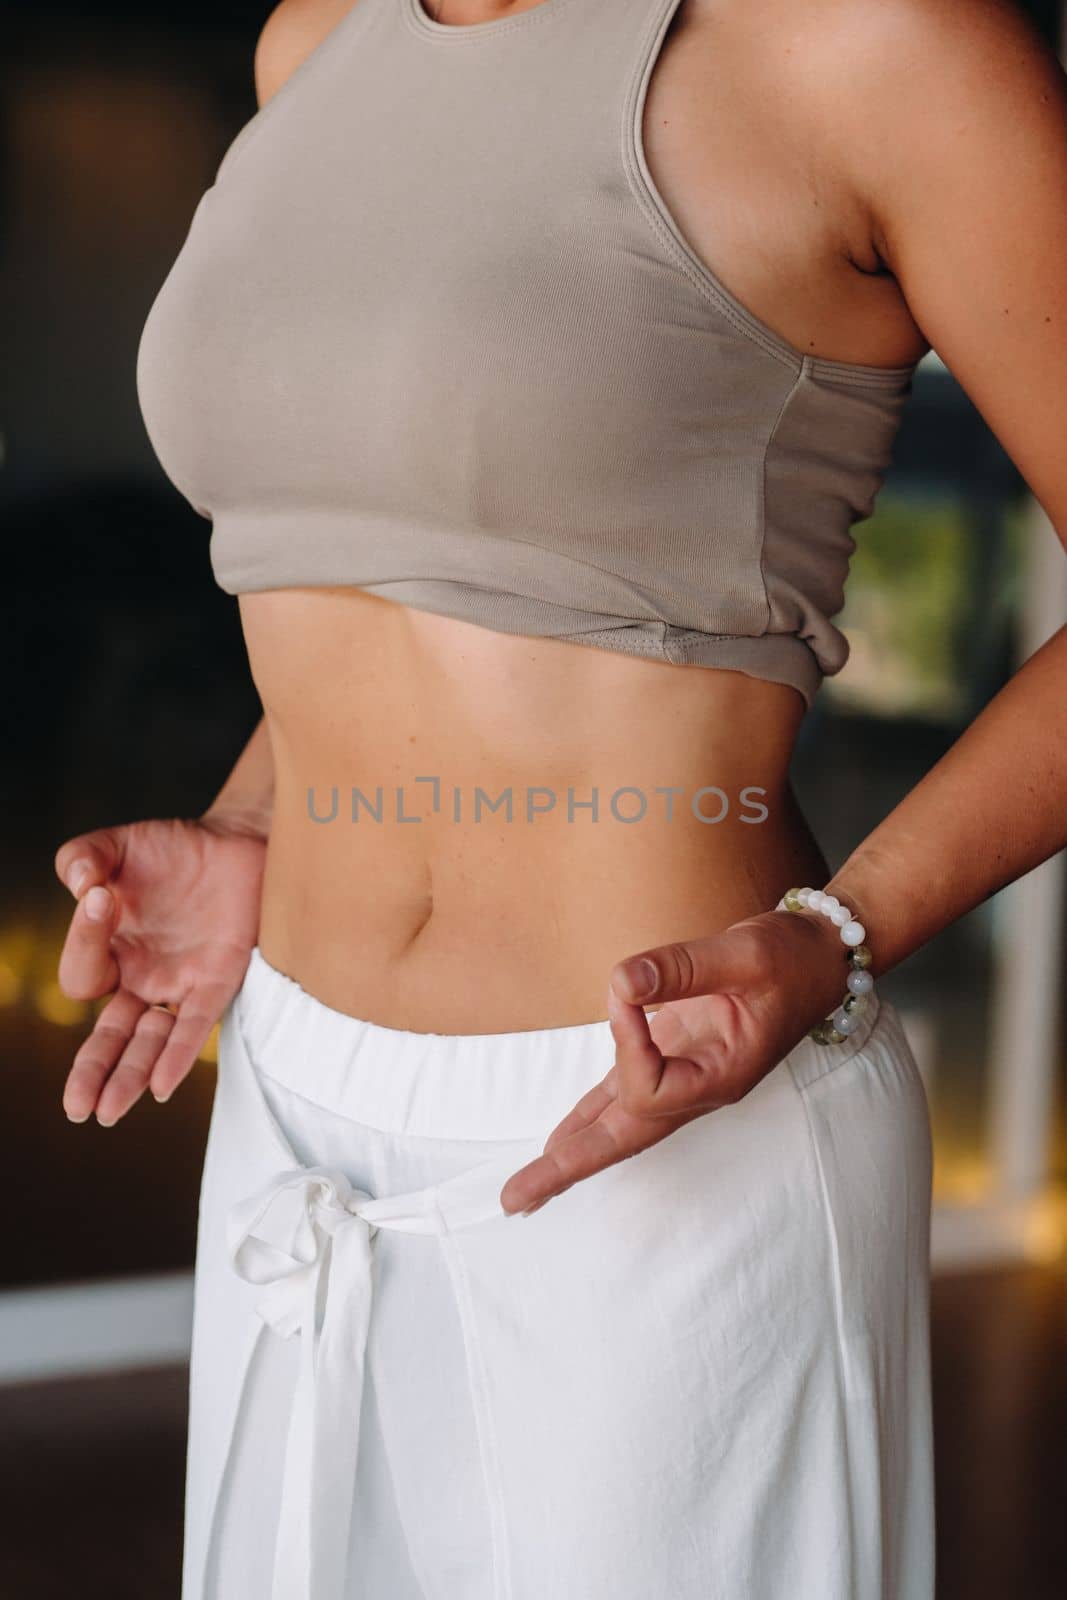 a woman does breathing exercises in the fitness room. Home sports training for the muscles of the press.